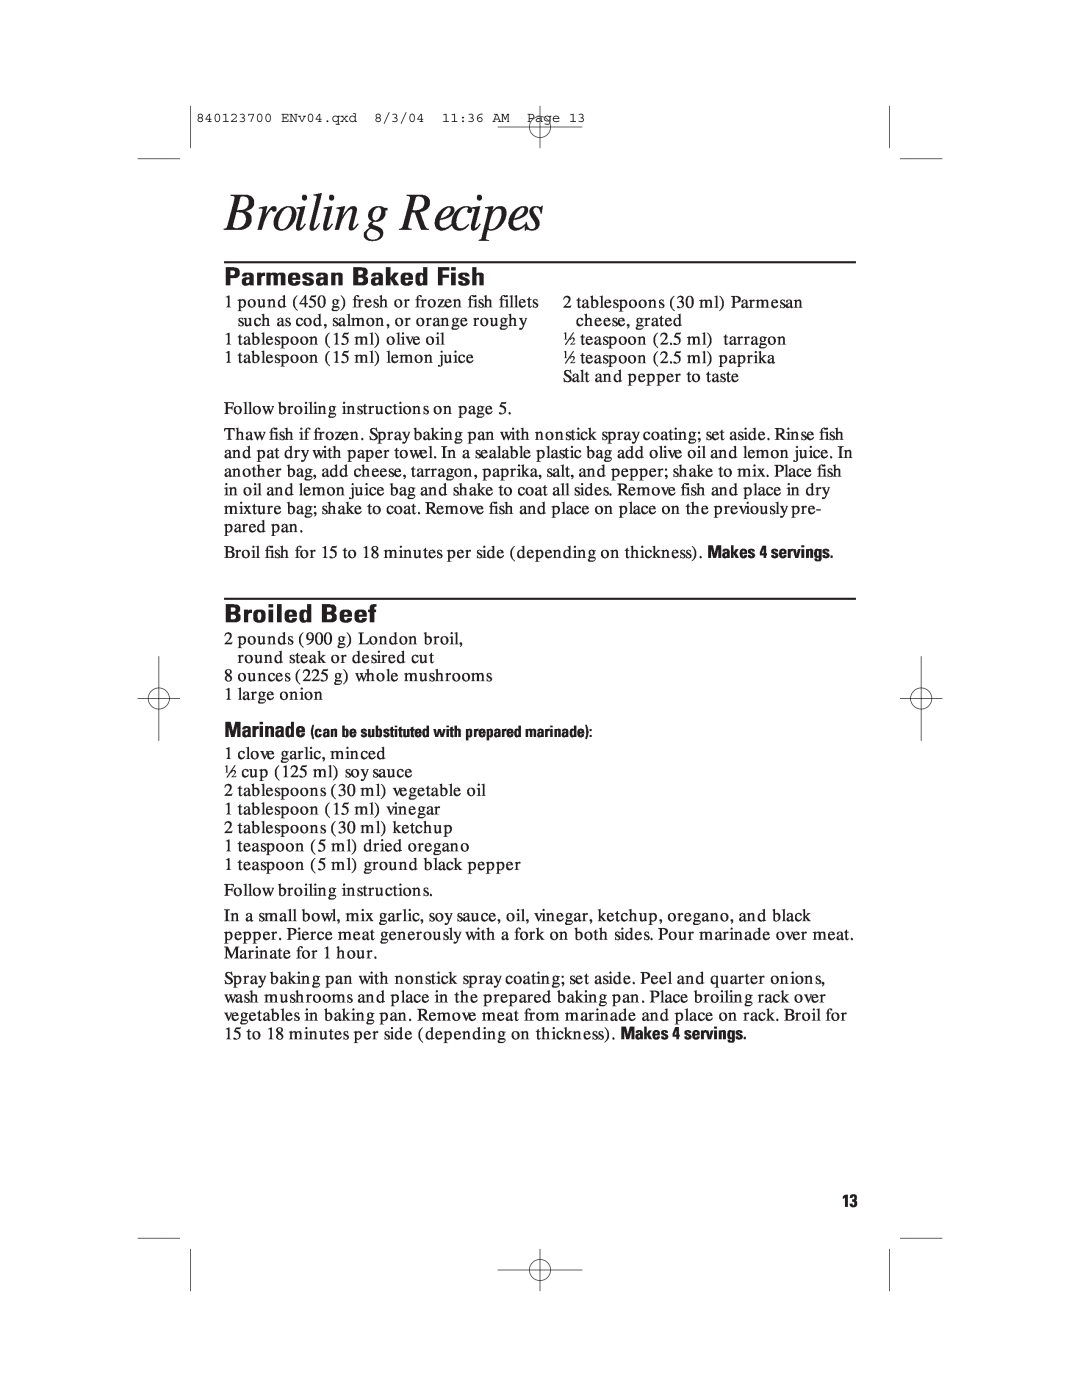 GE 168989, 840123700 manual Broiling Recipes, Parmesan Baked Fish, Broiled Beef 